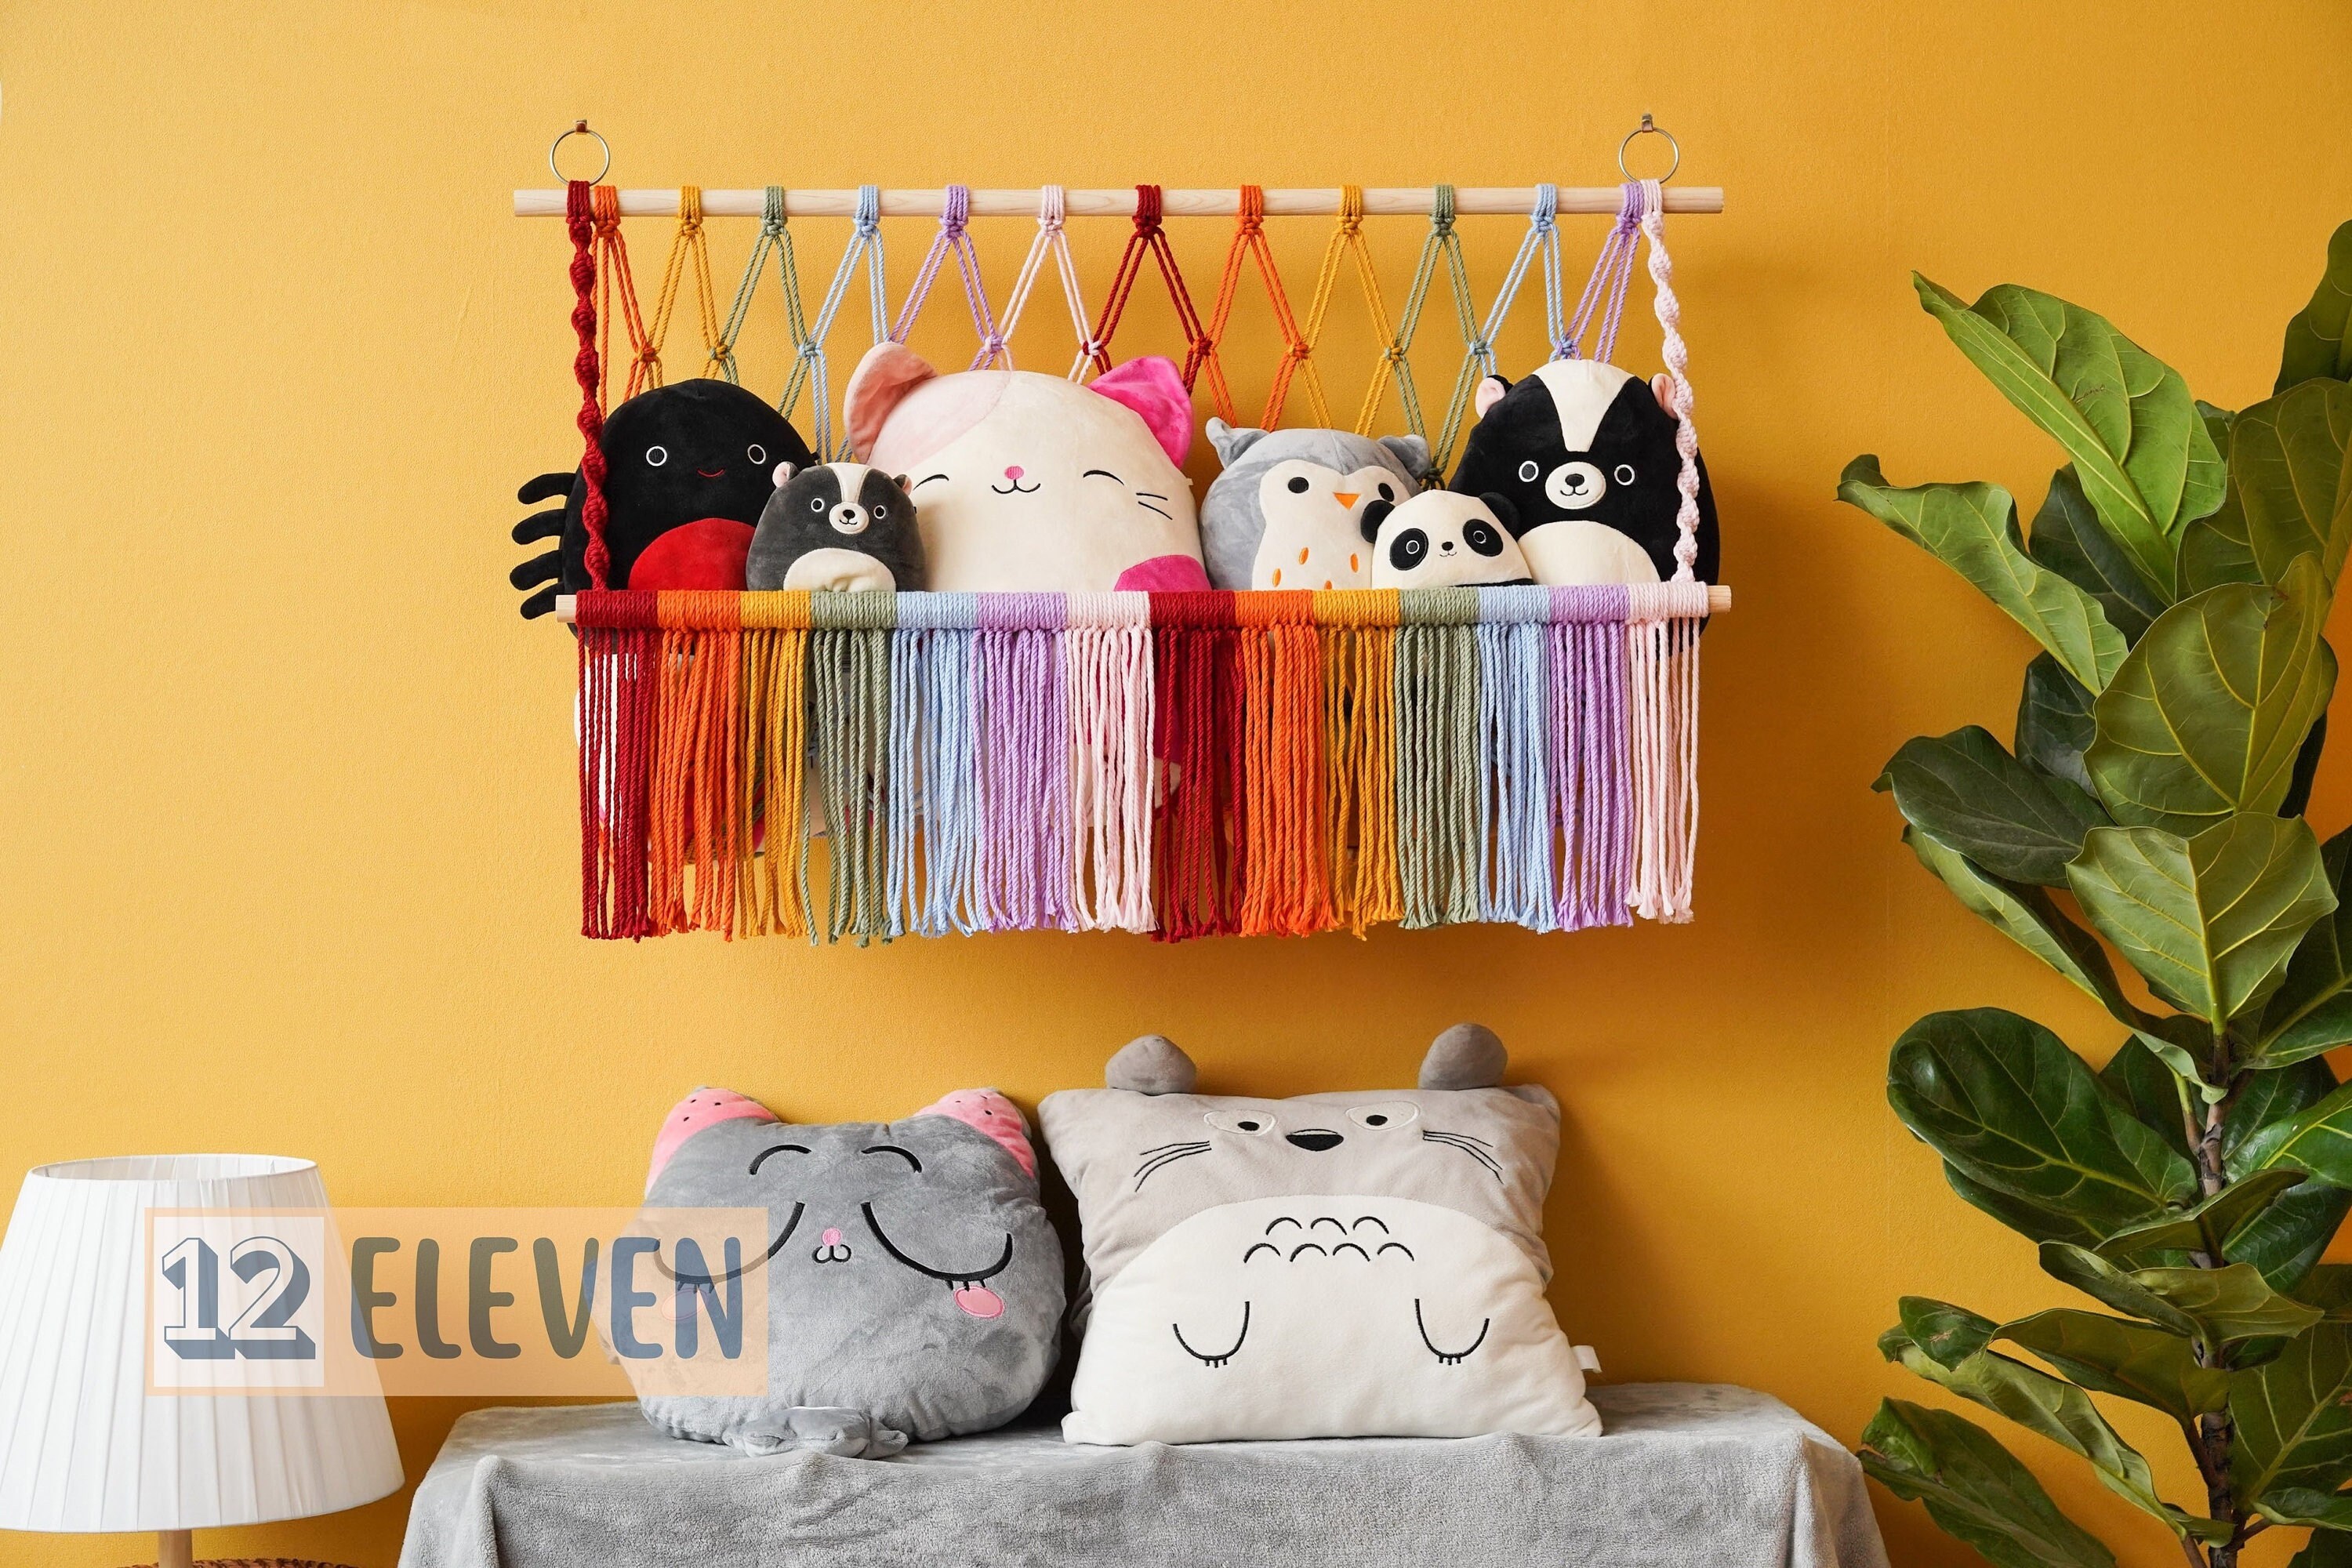 Using A Hanging Door Organizer For Stuffed Animal Storage - Small